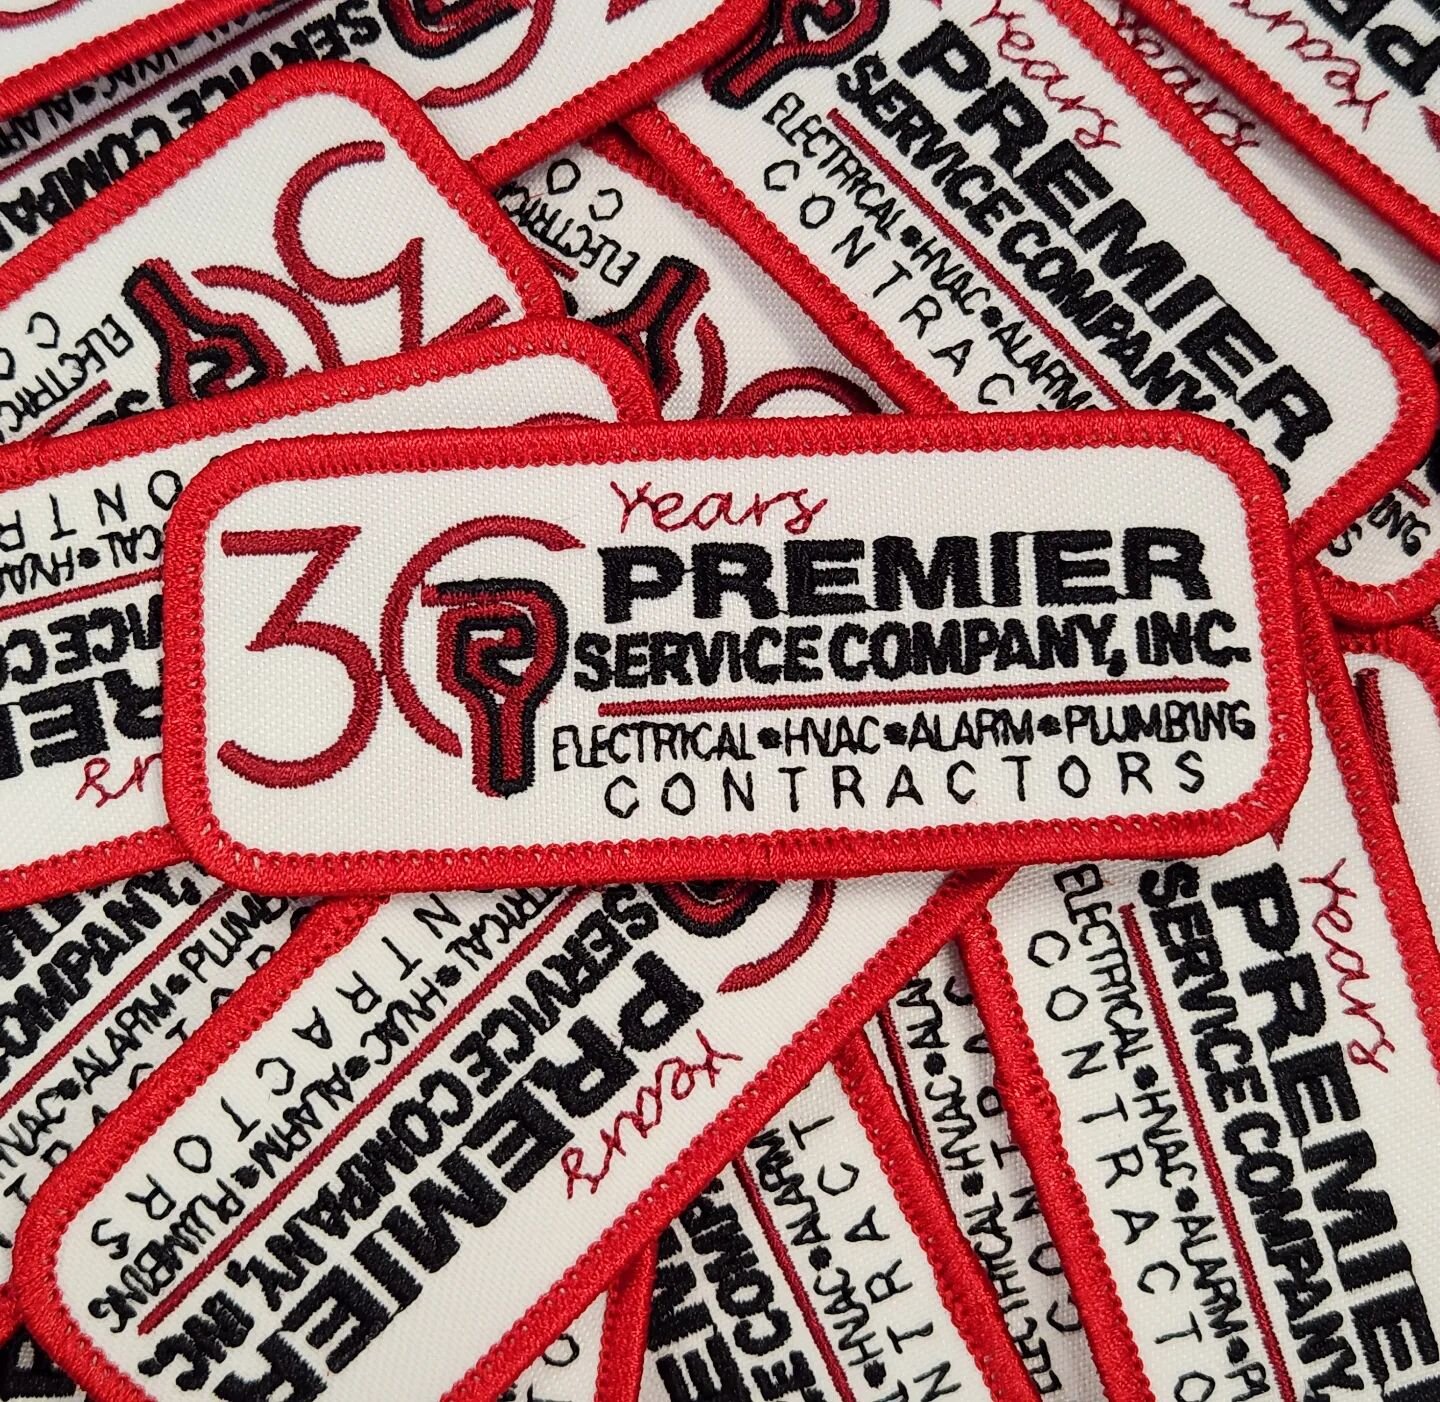 We've got patches! These patches are easily applied to anything through heat pressing but look just like embroidery! Lets discuss how we can make a patch perfect for you, your team, or your business.